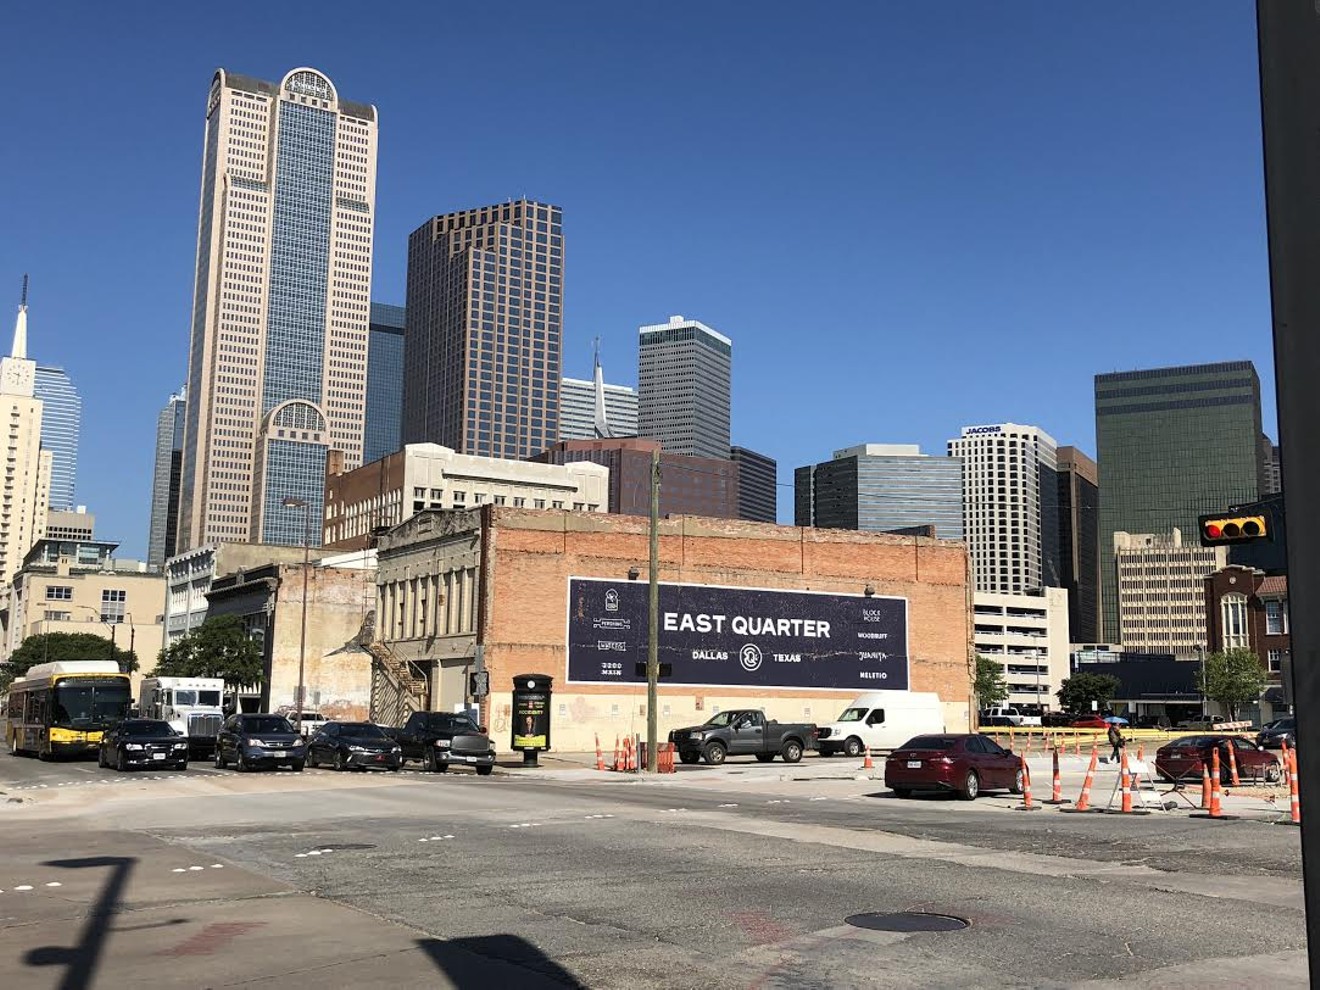 East Quarter, Dallas' newest district, is under construction. The project, led by Todd Interests, will refurbish 18 historic buildings in the area between downtown and Deep Ellum.